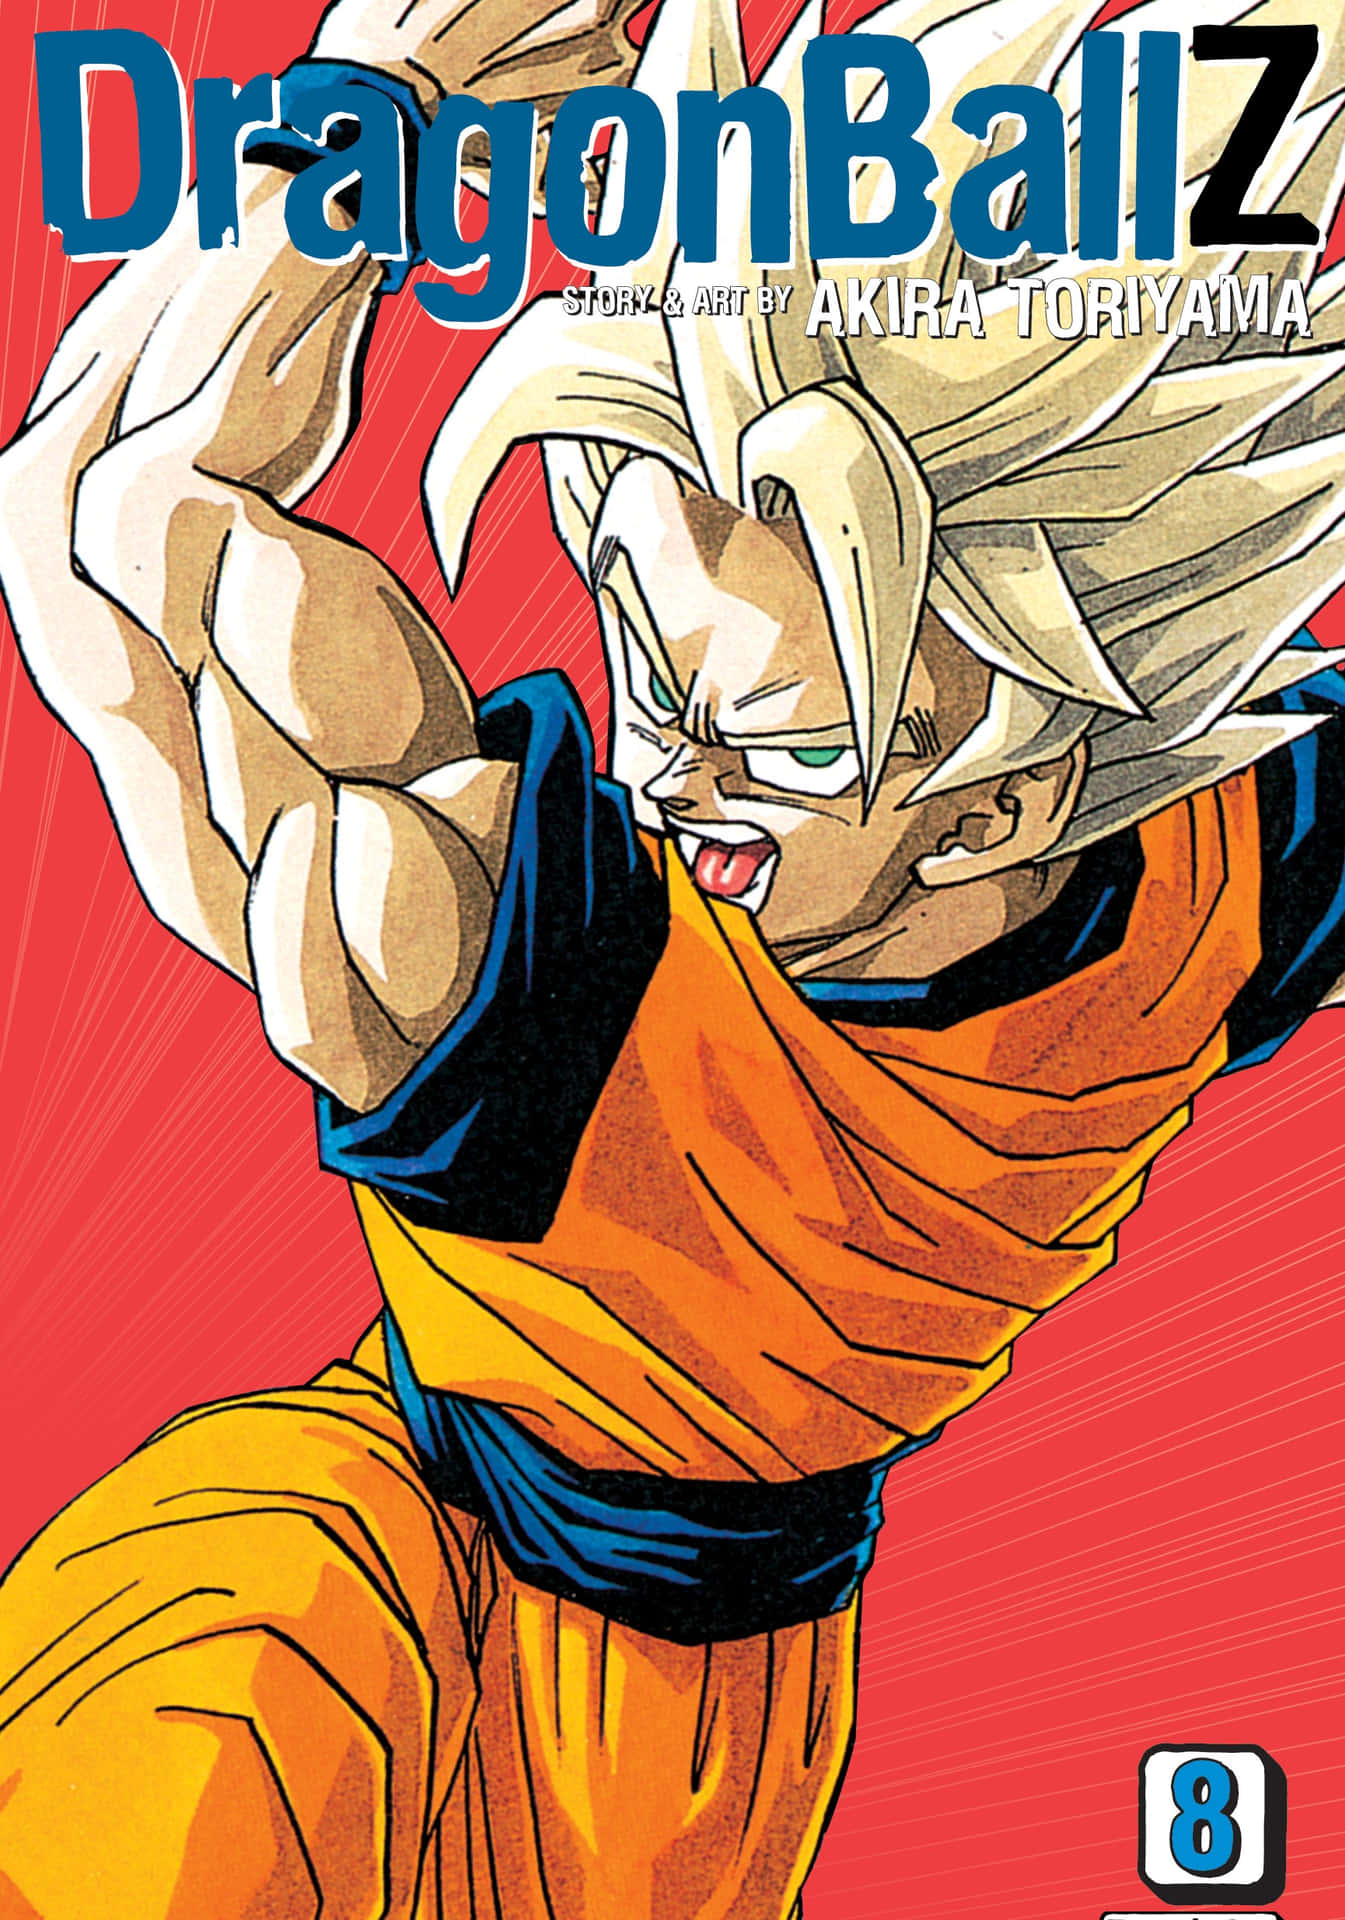 King Kai of the North Galaxy Watches Over the Dragon Ball Super Manga Adventure Wallpaper